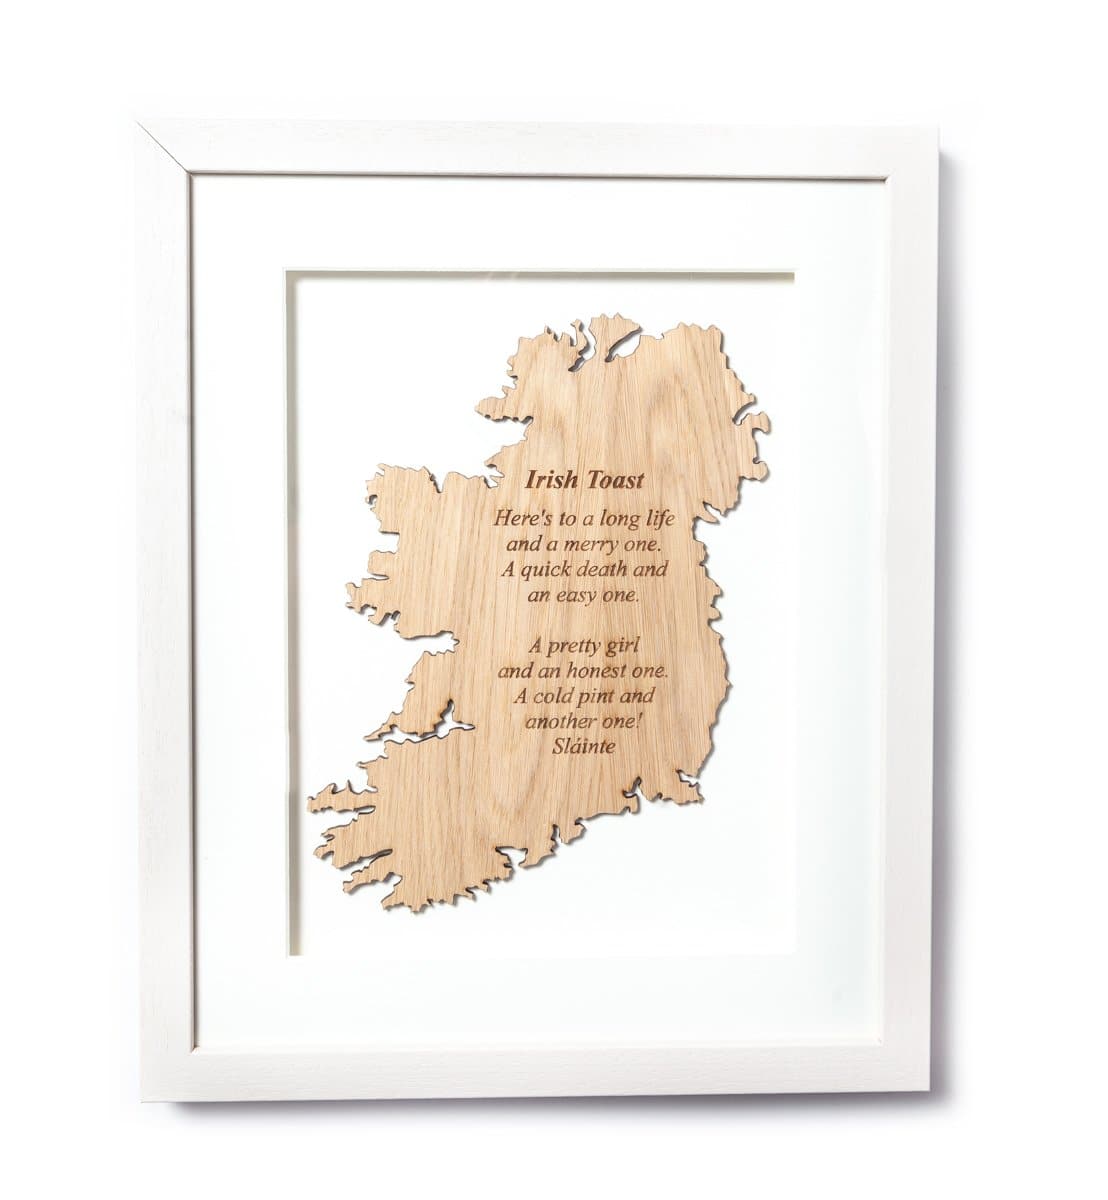 Irish Toast Framed Wall Decor Made in Ireland Irish Gift Wall Hanging Unique Gift Crafted by Our Maker-Partner in Co. Meath